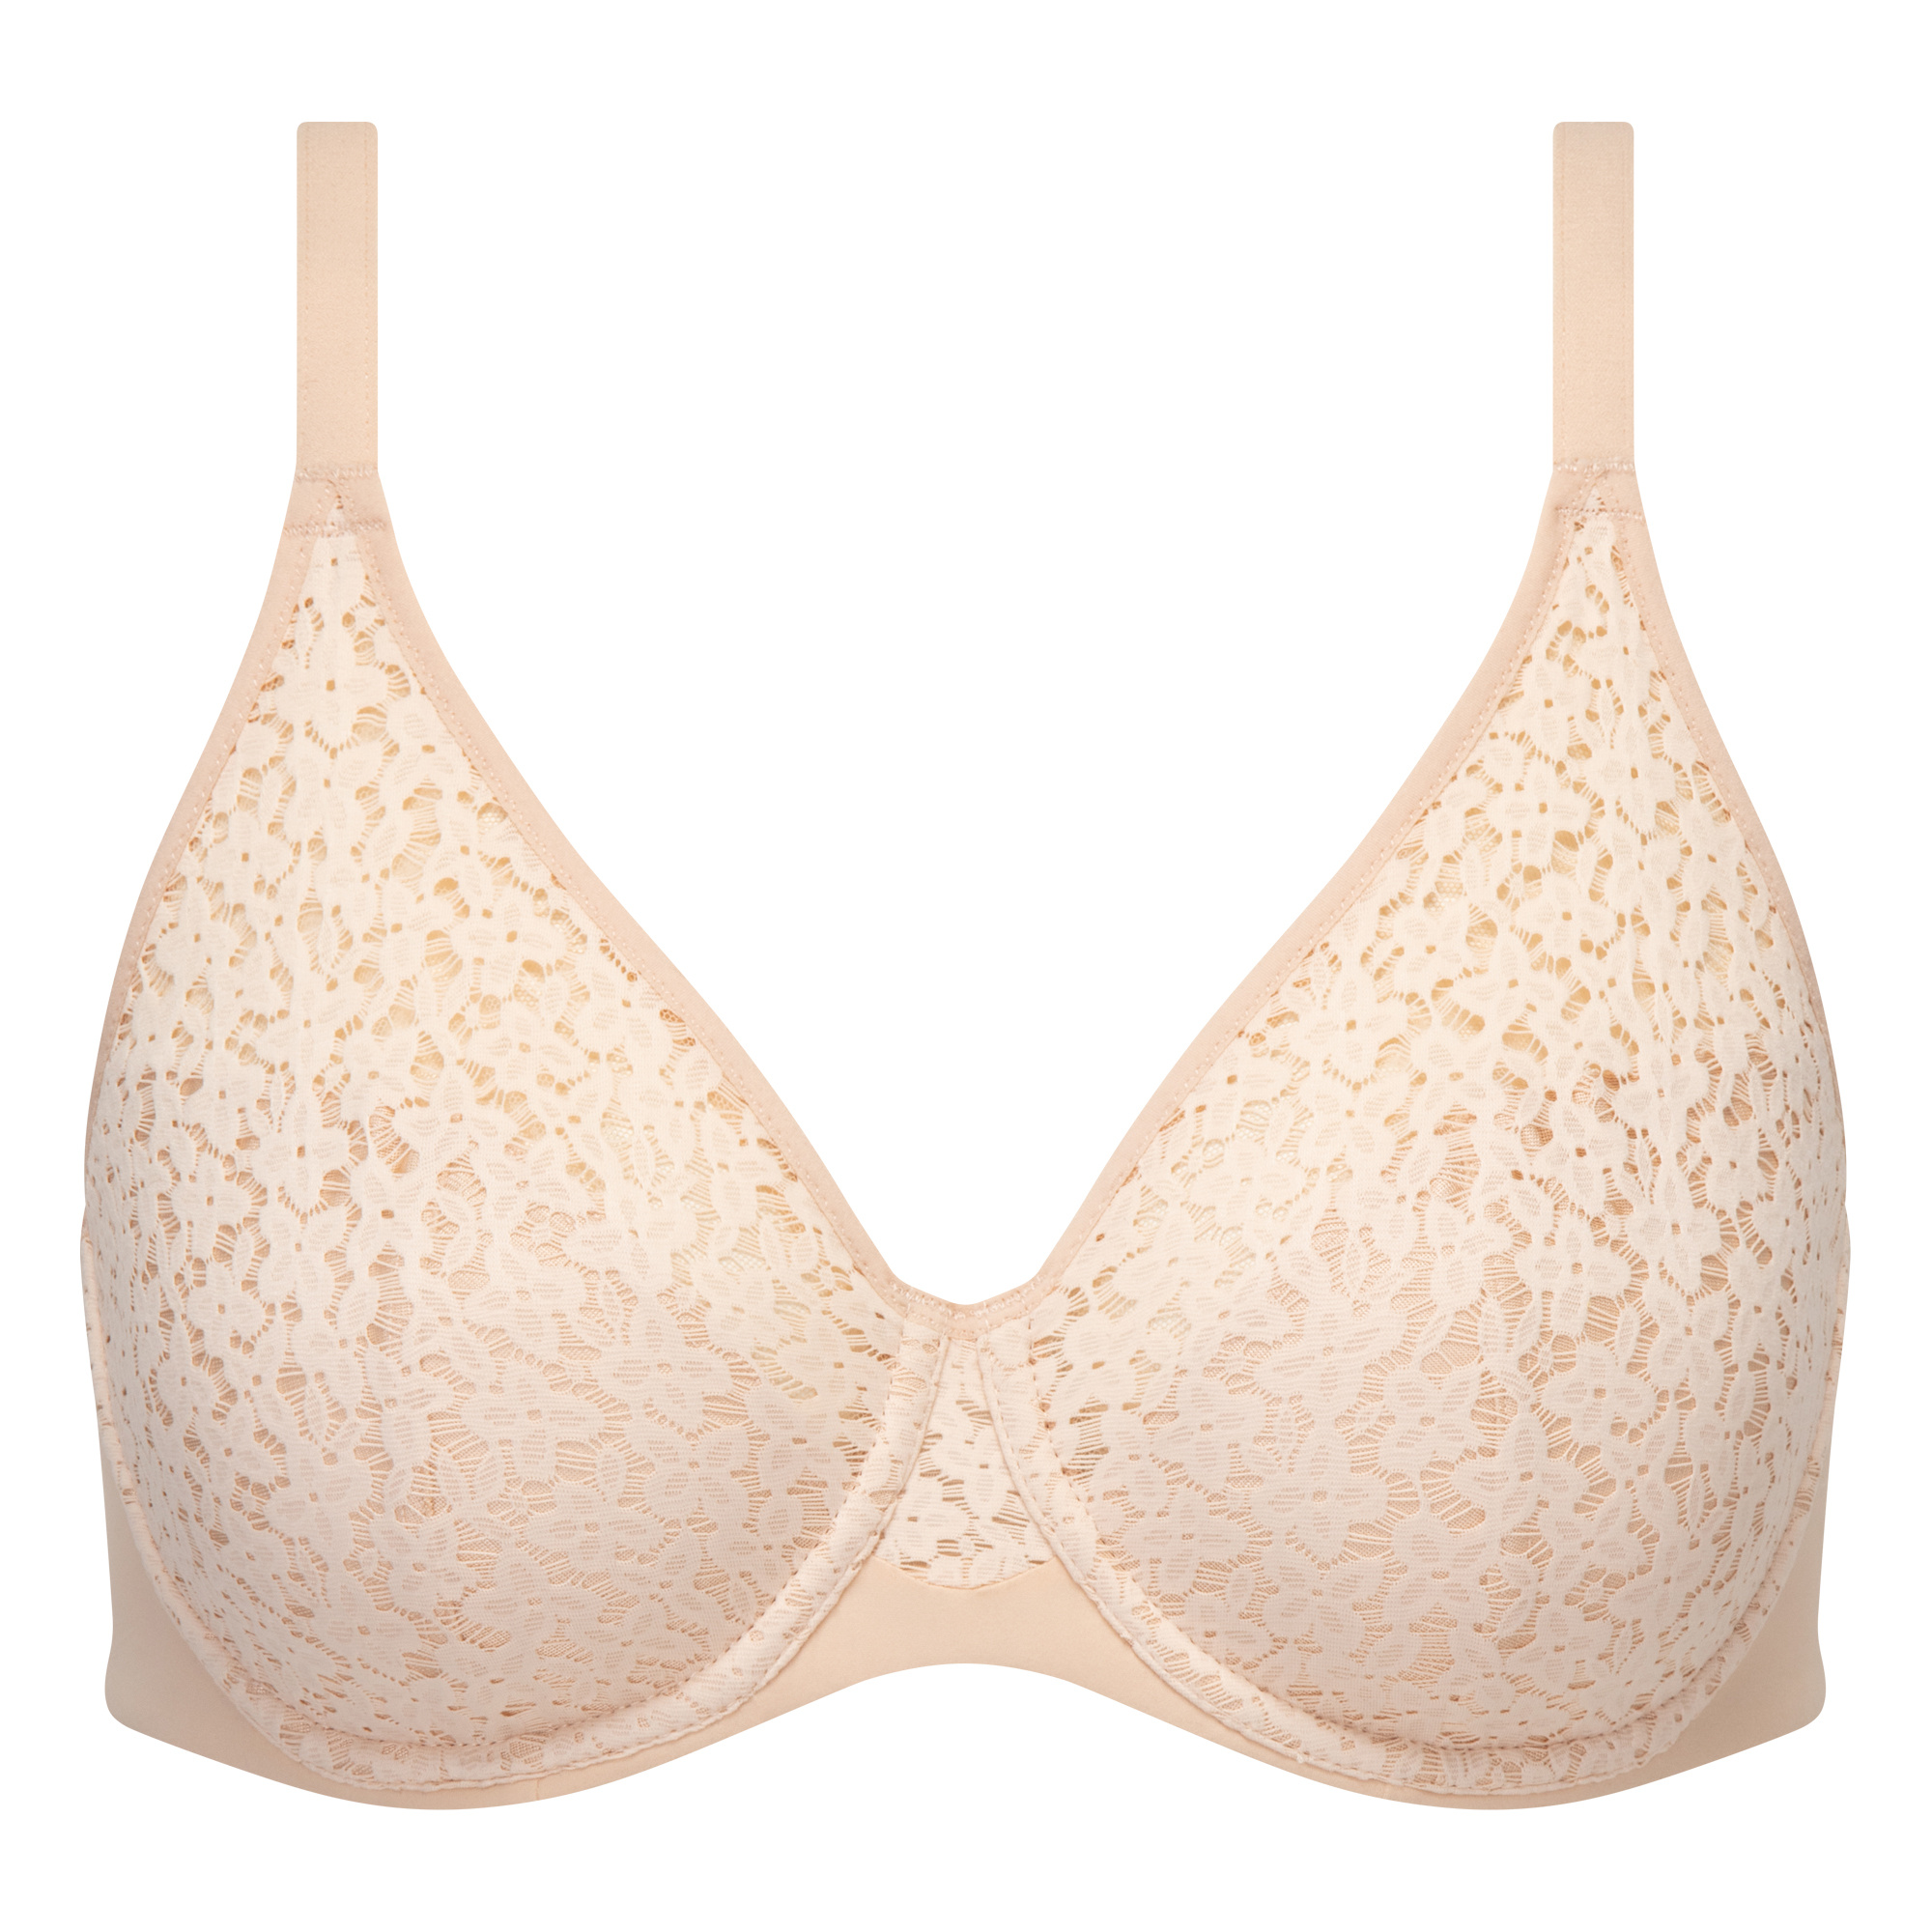 Norah Molded Bra 13F1 - Lace & Day